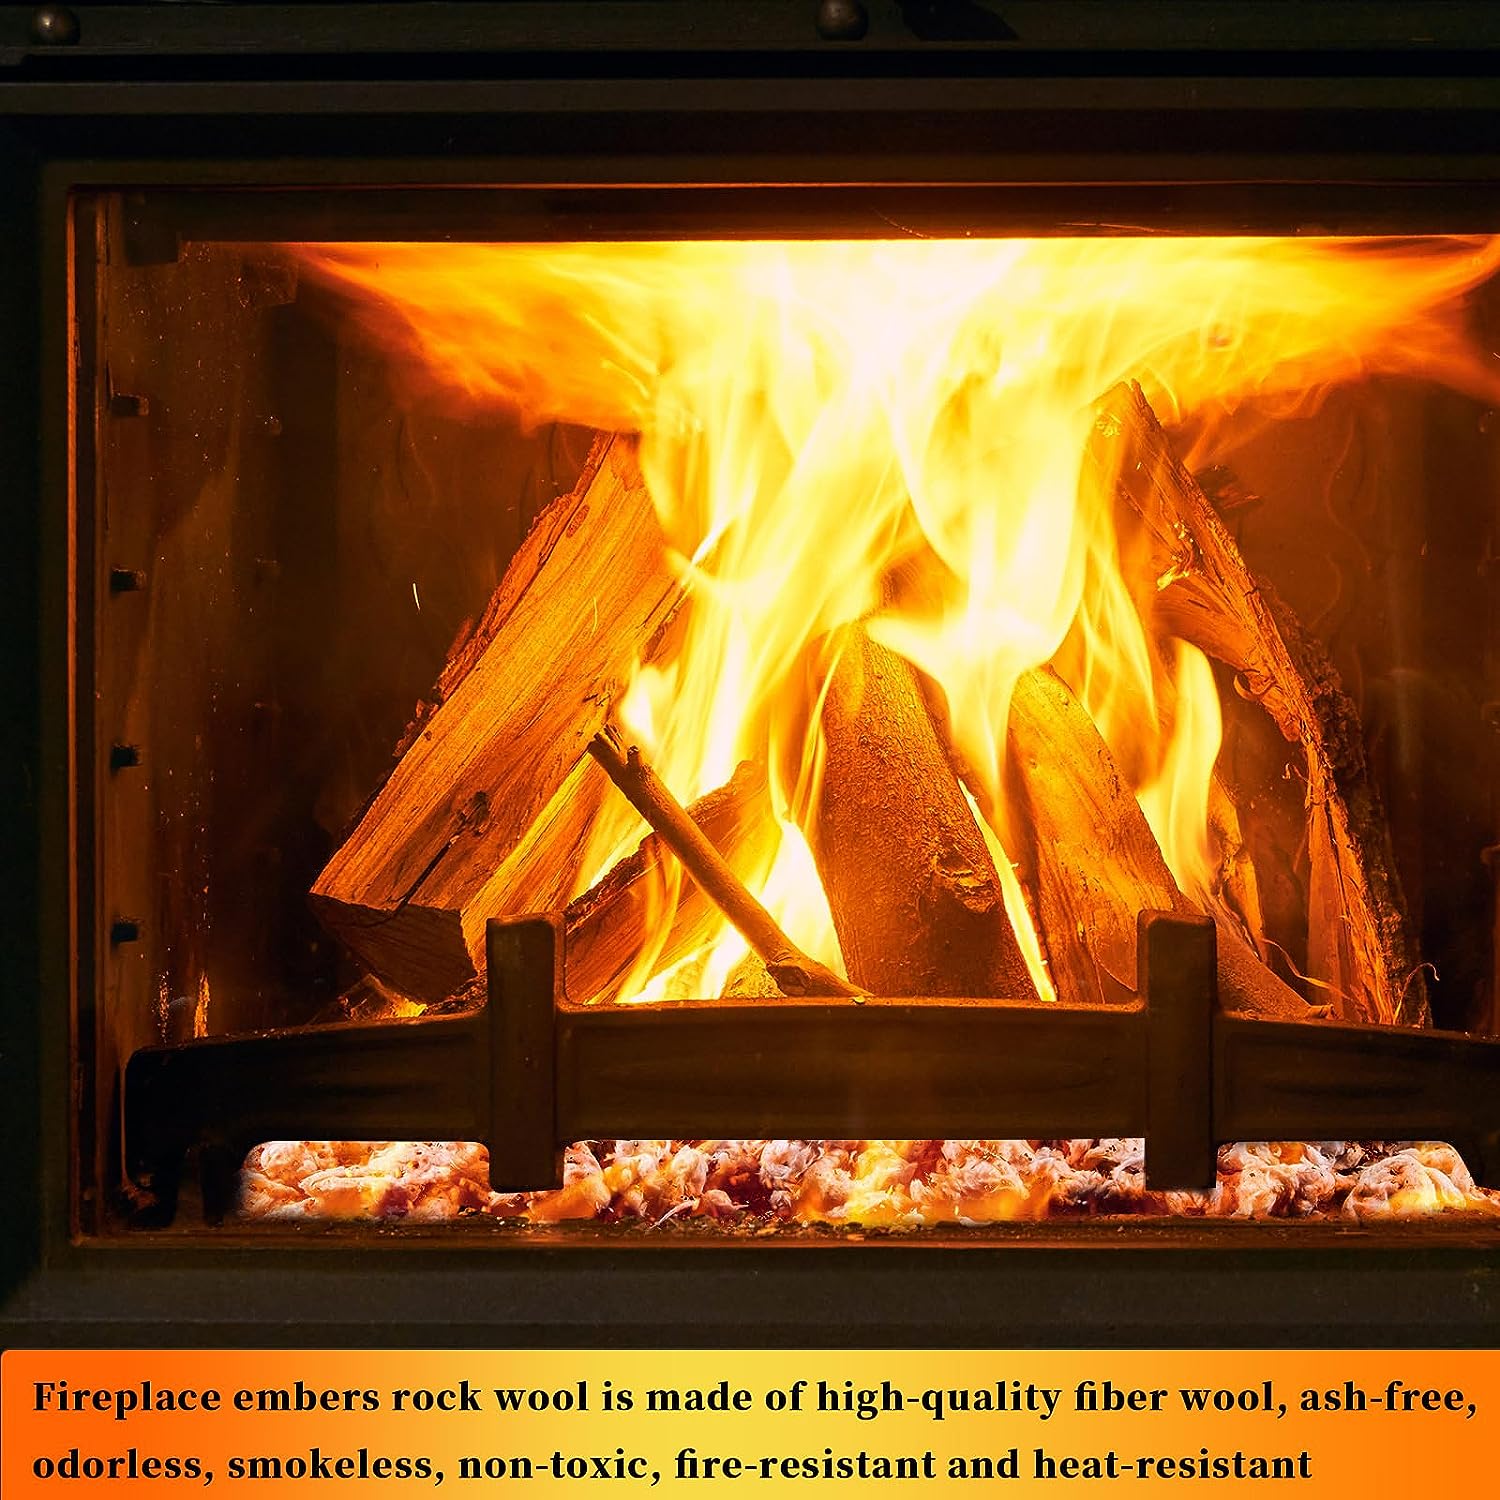 Glowing Fireplace Embers GAS Fireplace Glowing Embers, Rock Wool for Vent Free or Vented GAS Log Sets, Inserts and Fireplaces. Large Bag 4 oz